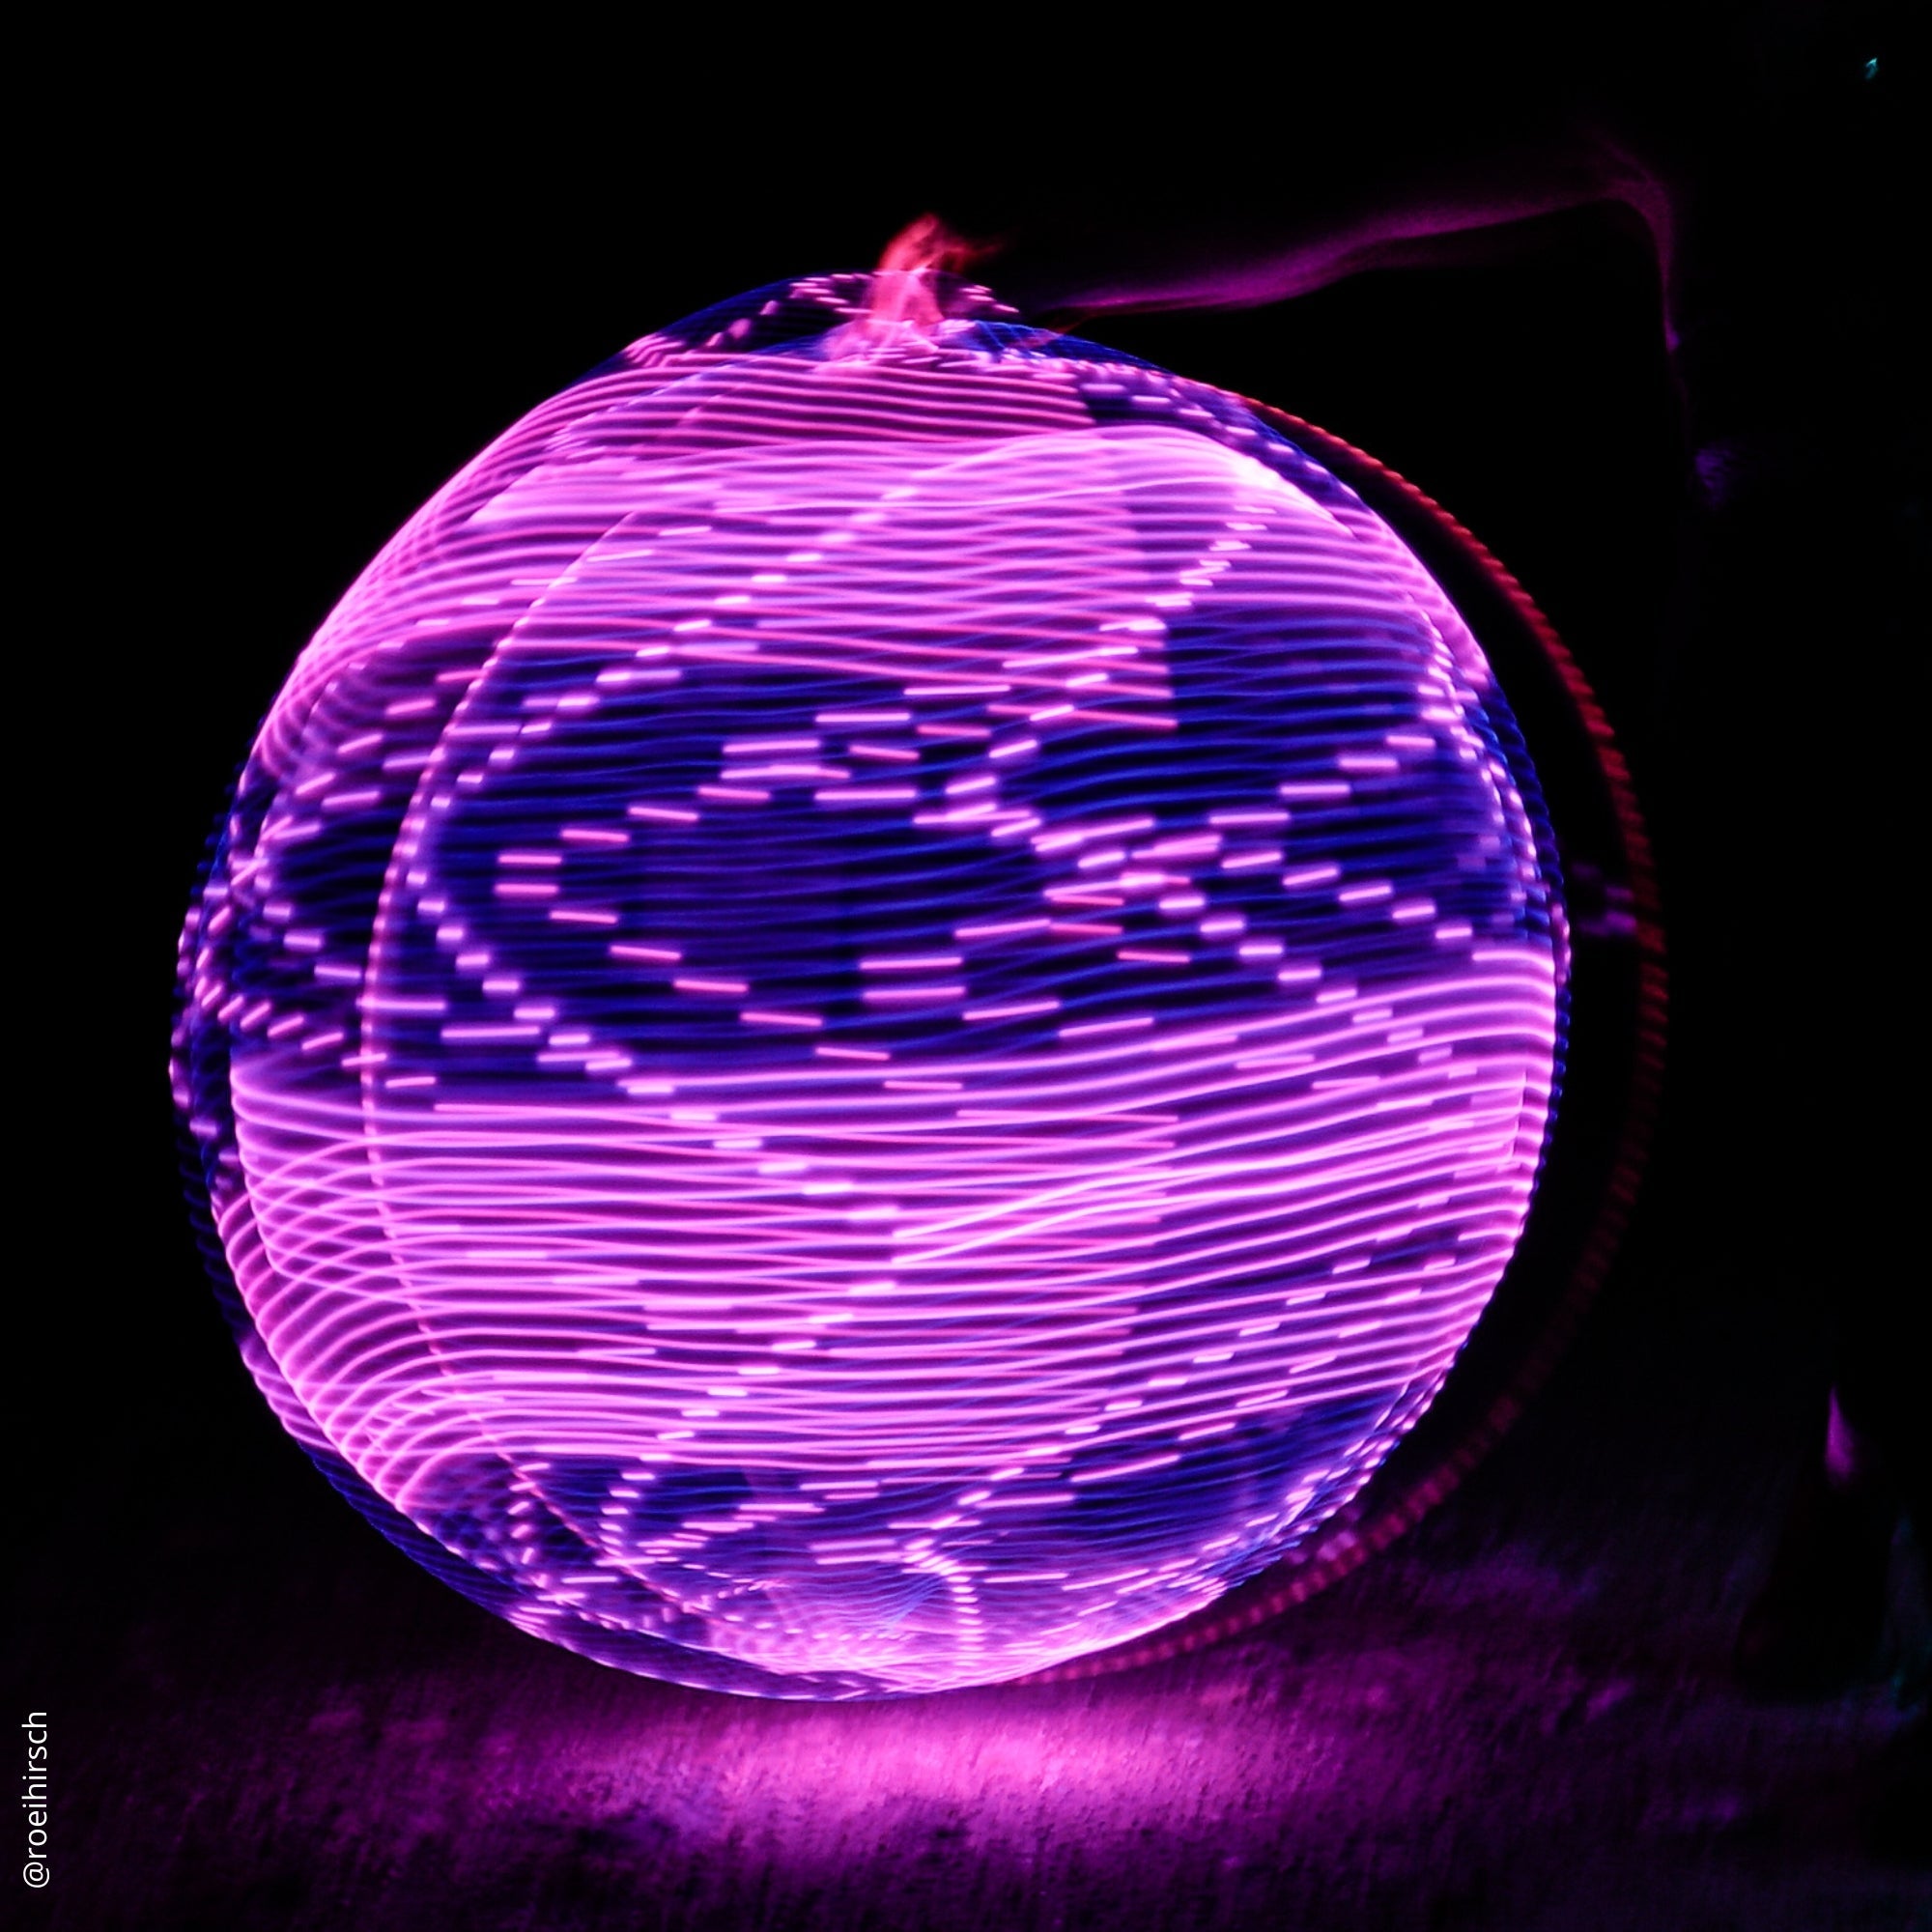 hoop spinning with light trails